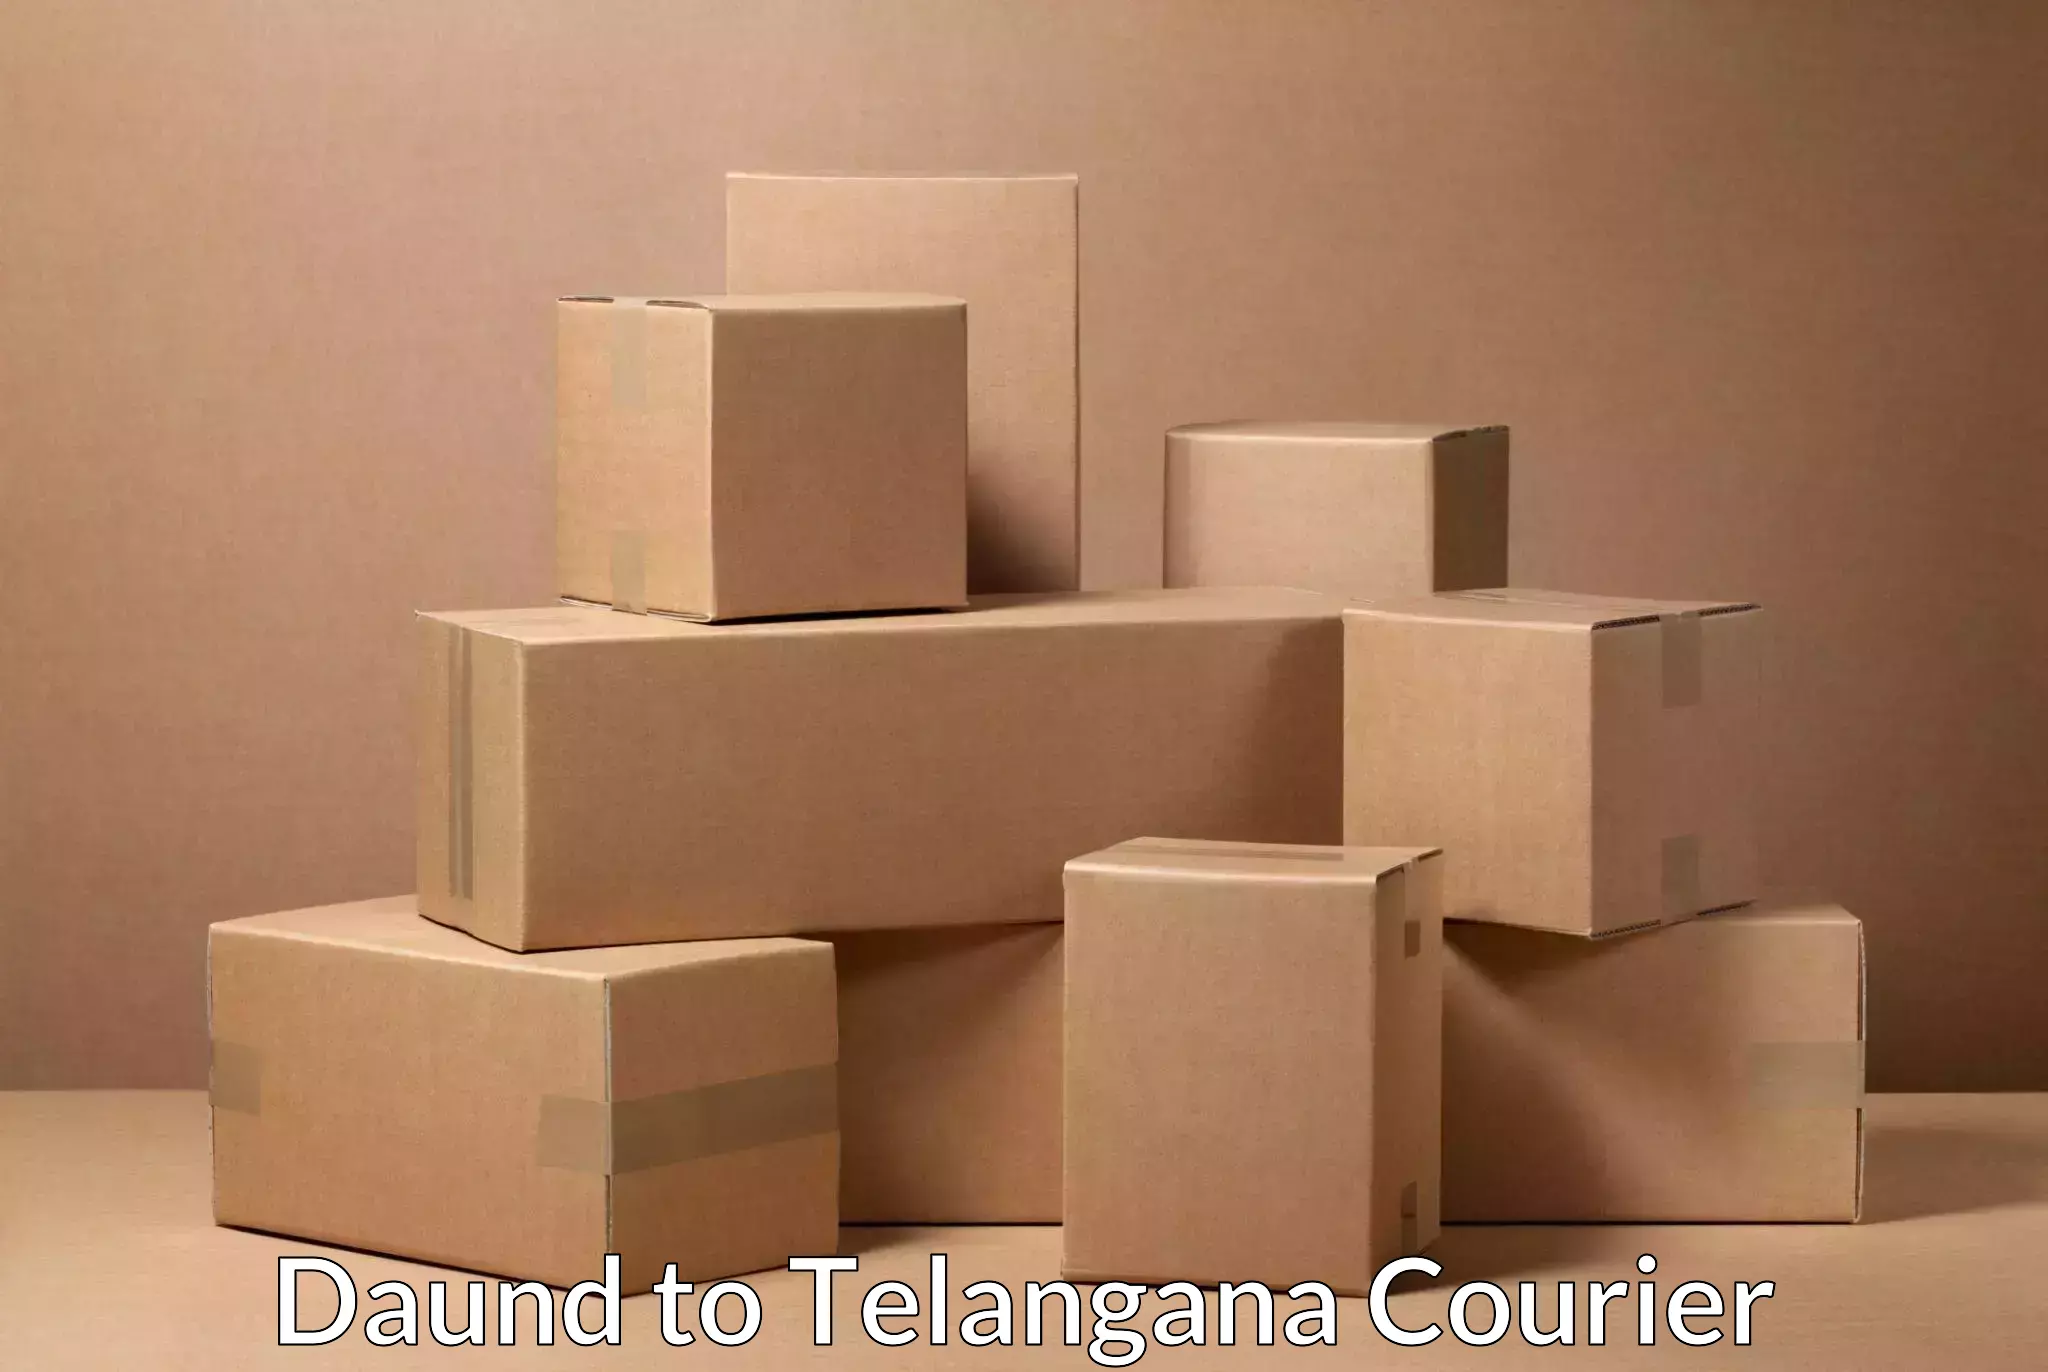 Efficient parcel delivery Daund to Telangana